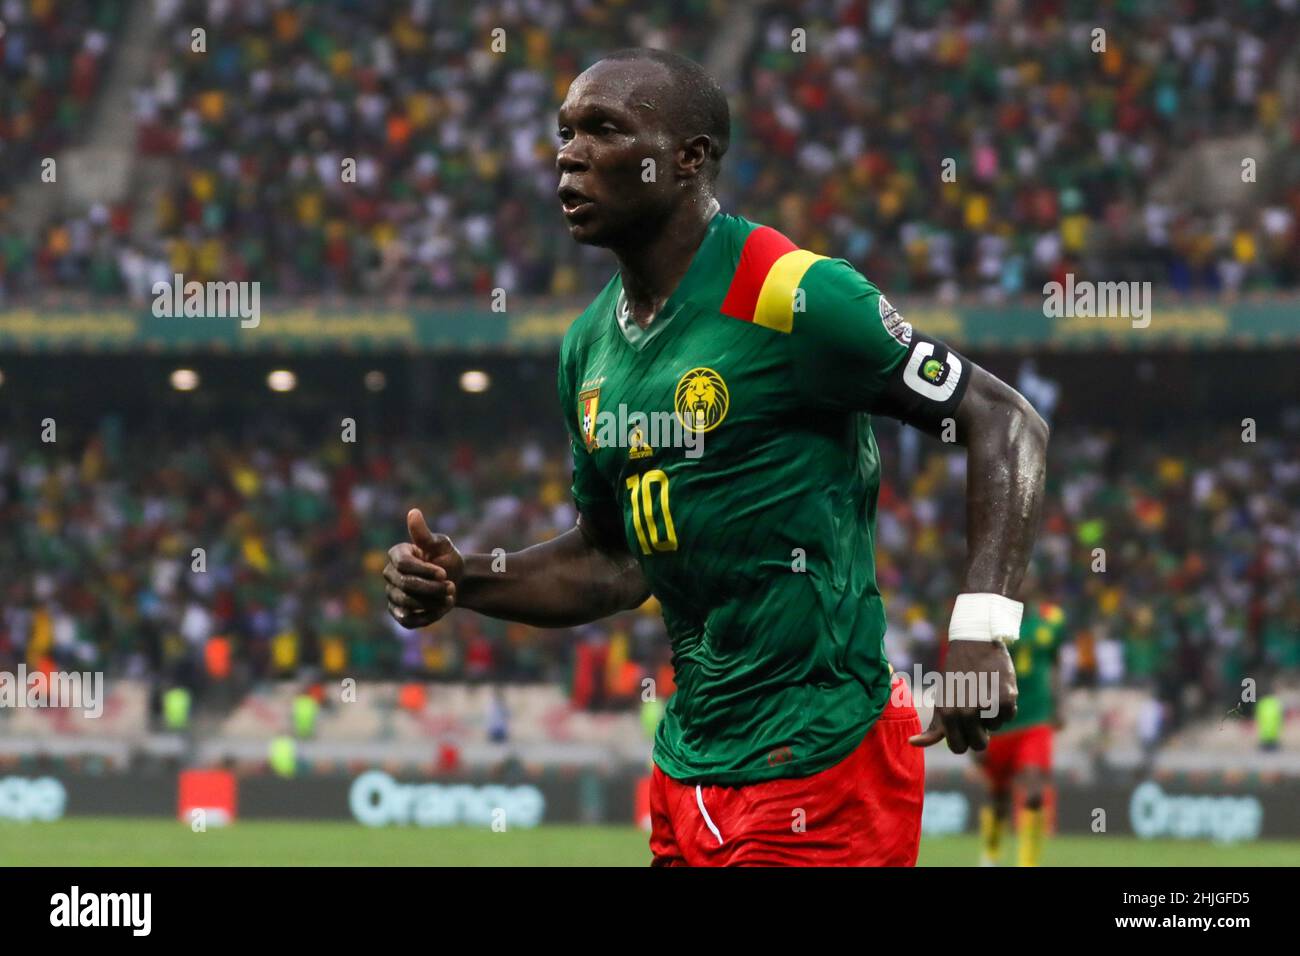 Cameroon, Douala, 29 January 2022 - Vincent Aboubakar of Cameroon during the Africa Cup on Nations Play Offs - Quarter-finals match between Gambia and Cameroon at Japoma Stadium, Douala, Cameroon 29/01/2022 Photo SF Credit: Sebo47/Alamy Live News Stock Photo